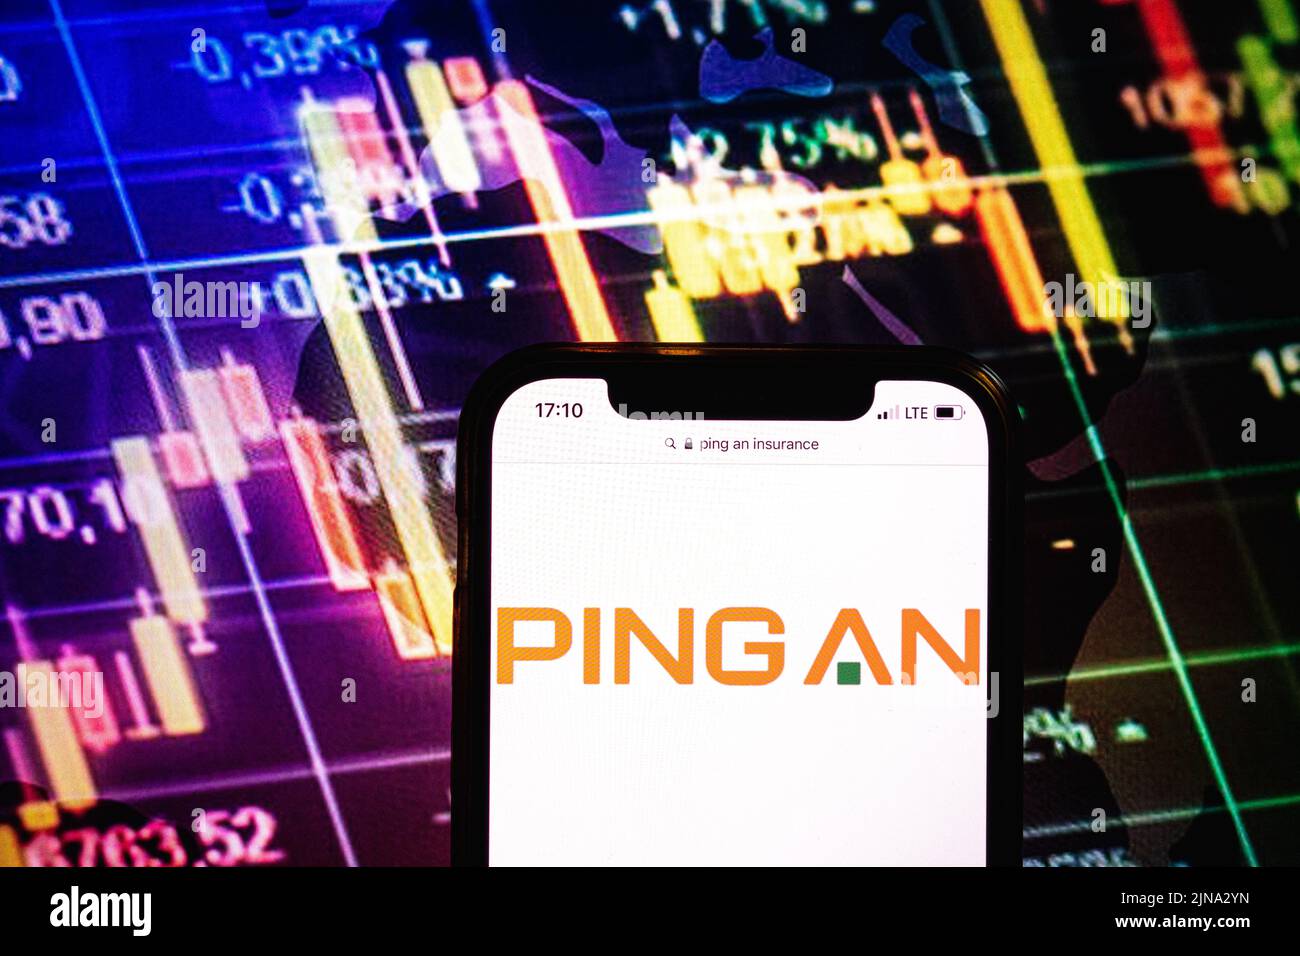 KONSKIE, POLAND - August 09, 2022: Smartphone displaying logo of Ping An Insurance company on stock exchange diagram background Stock Photo